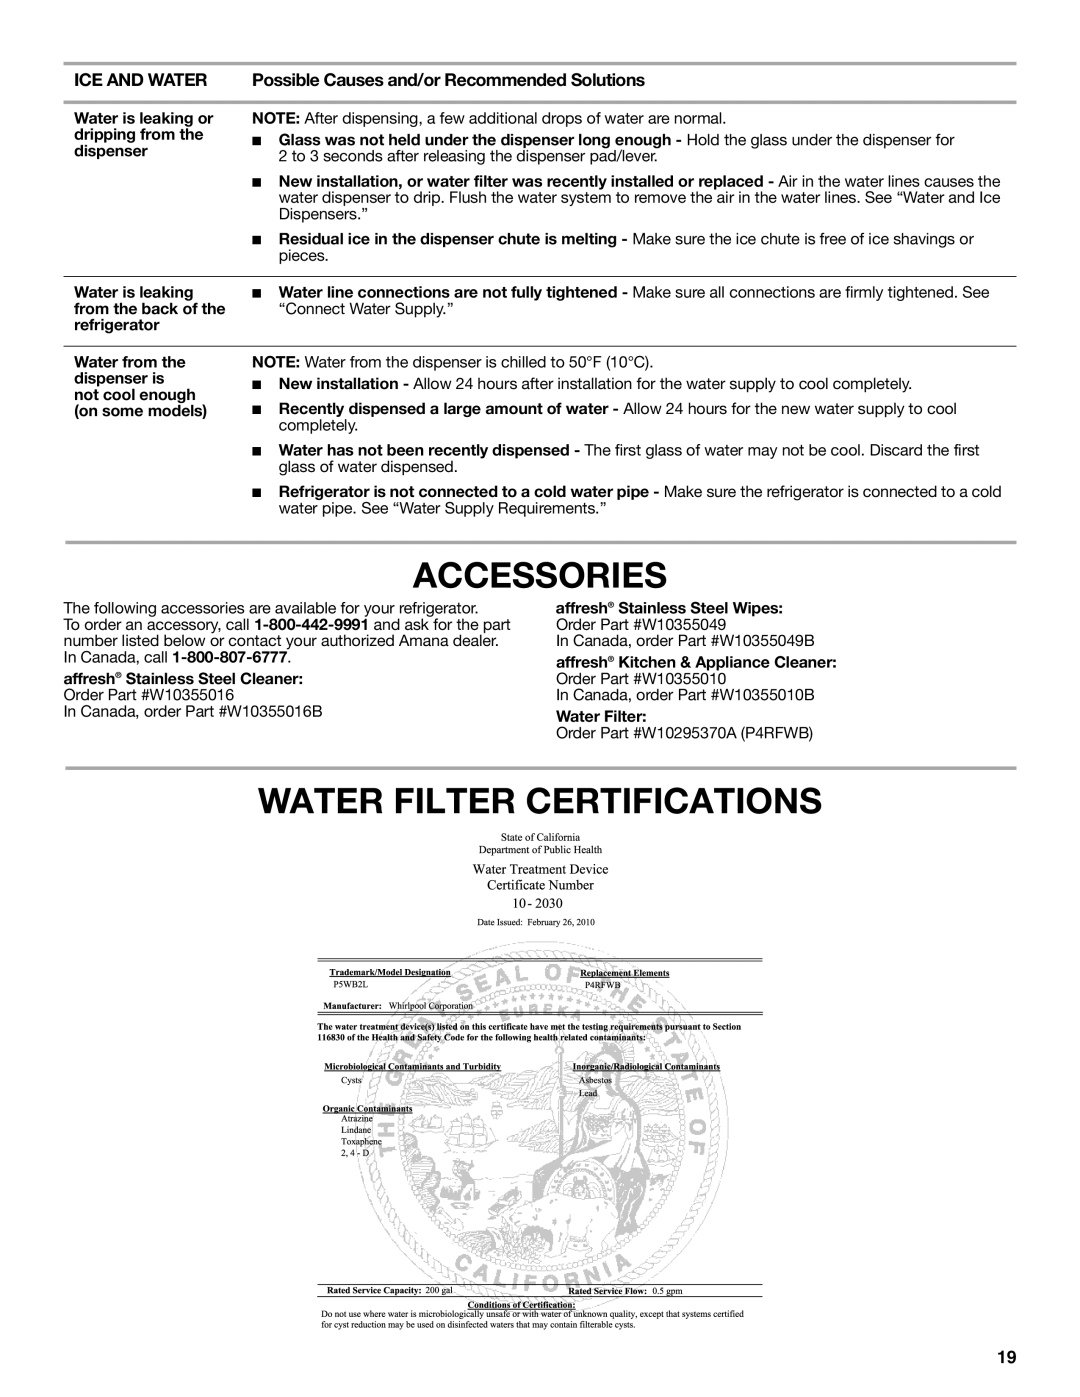 Amana ASD2275BRS, ASD2575BRW, ASD2575BRS, ASD2275BRB Accessories, Water Filter Certifications, Affresh Stainless Steel Wipes 